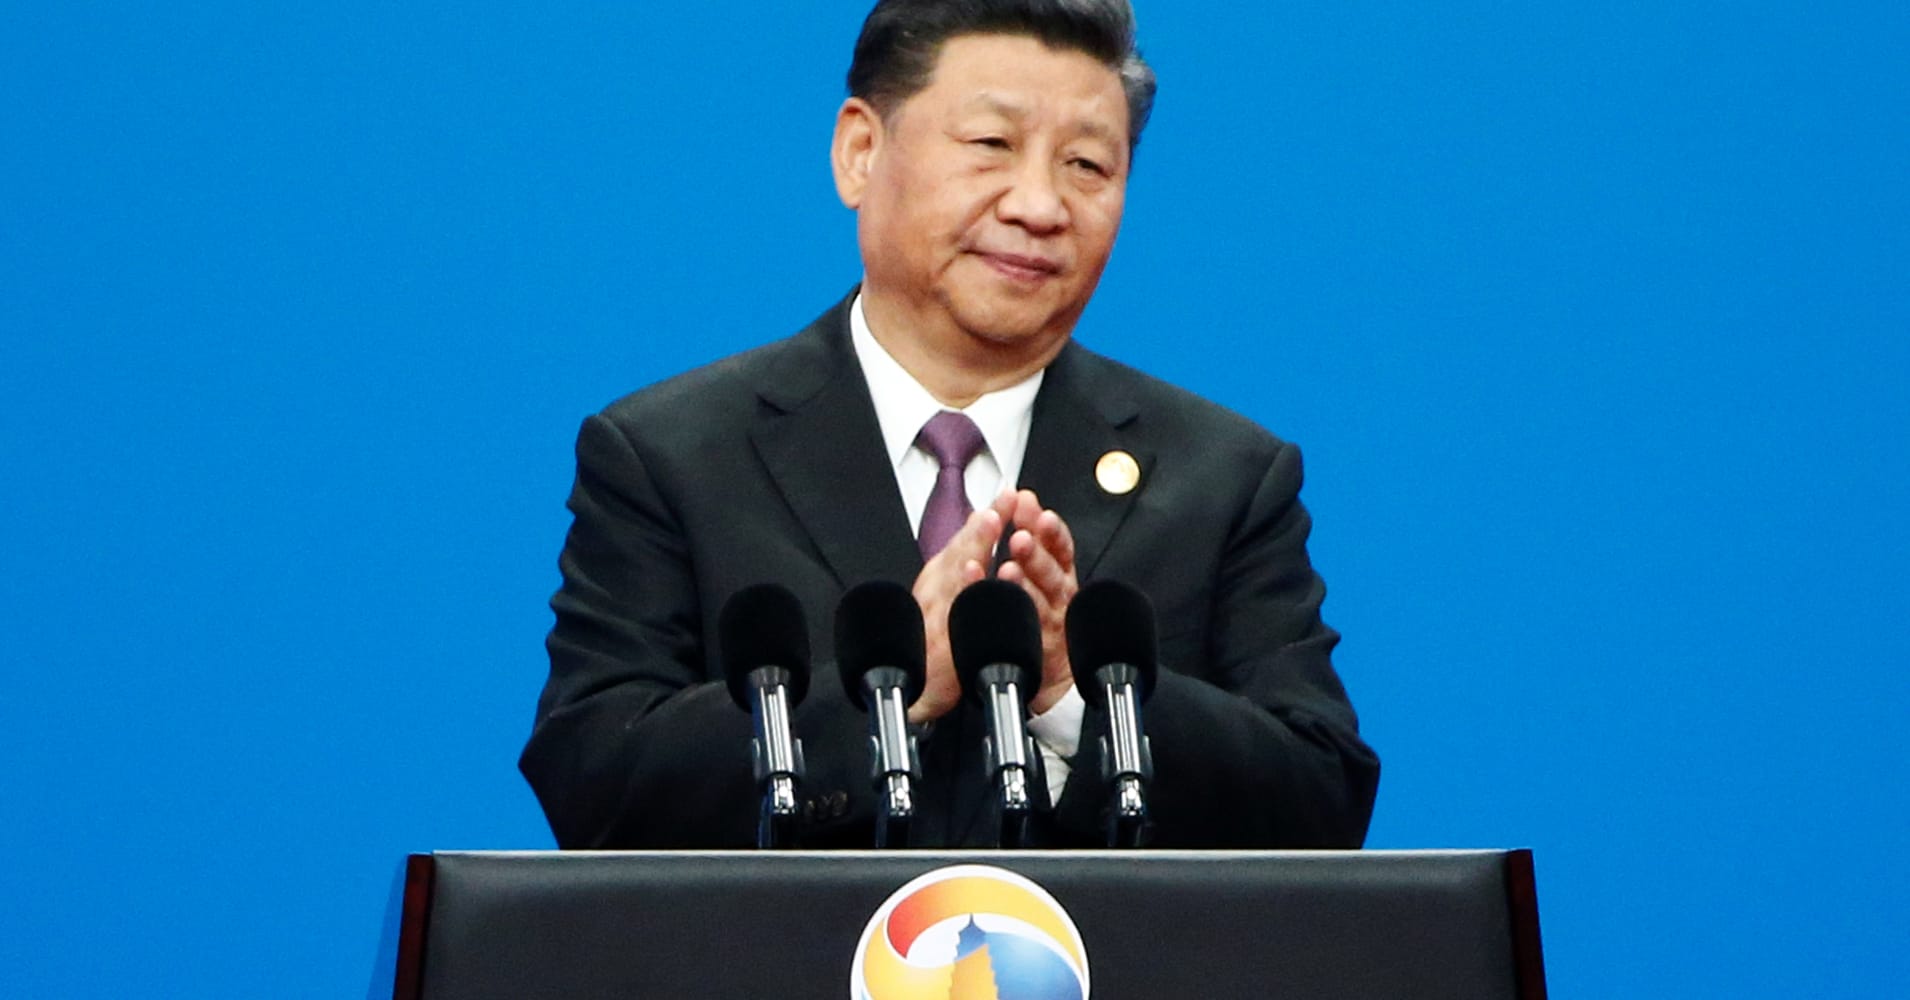 Xi tells world leaders he's committed to reforming China, but provides few details